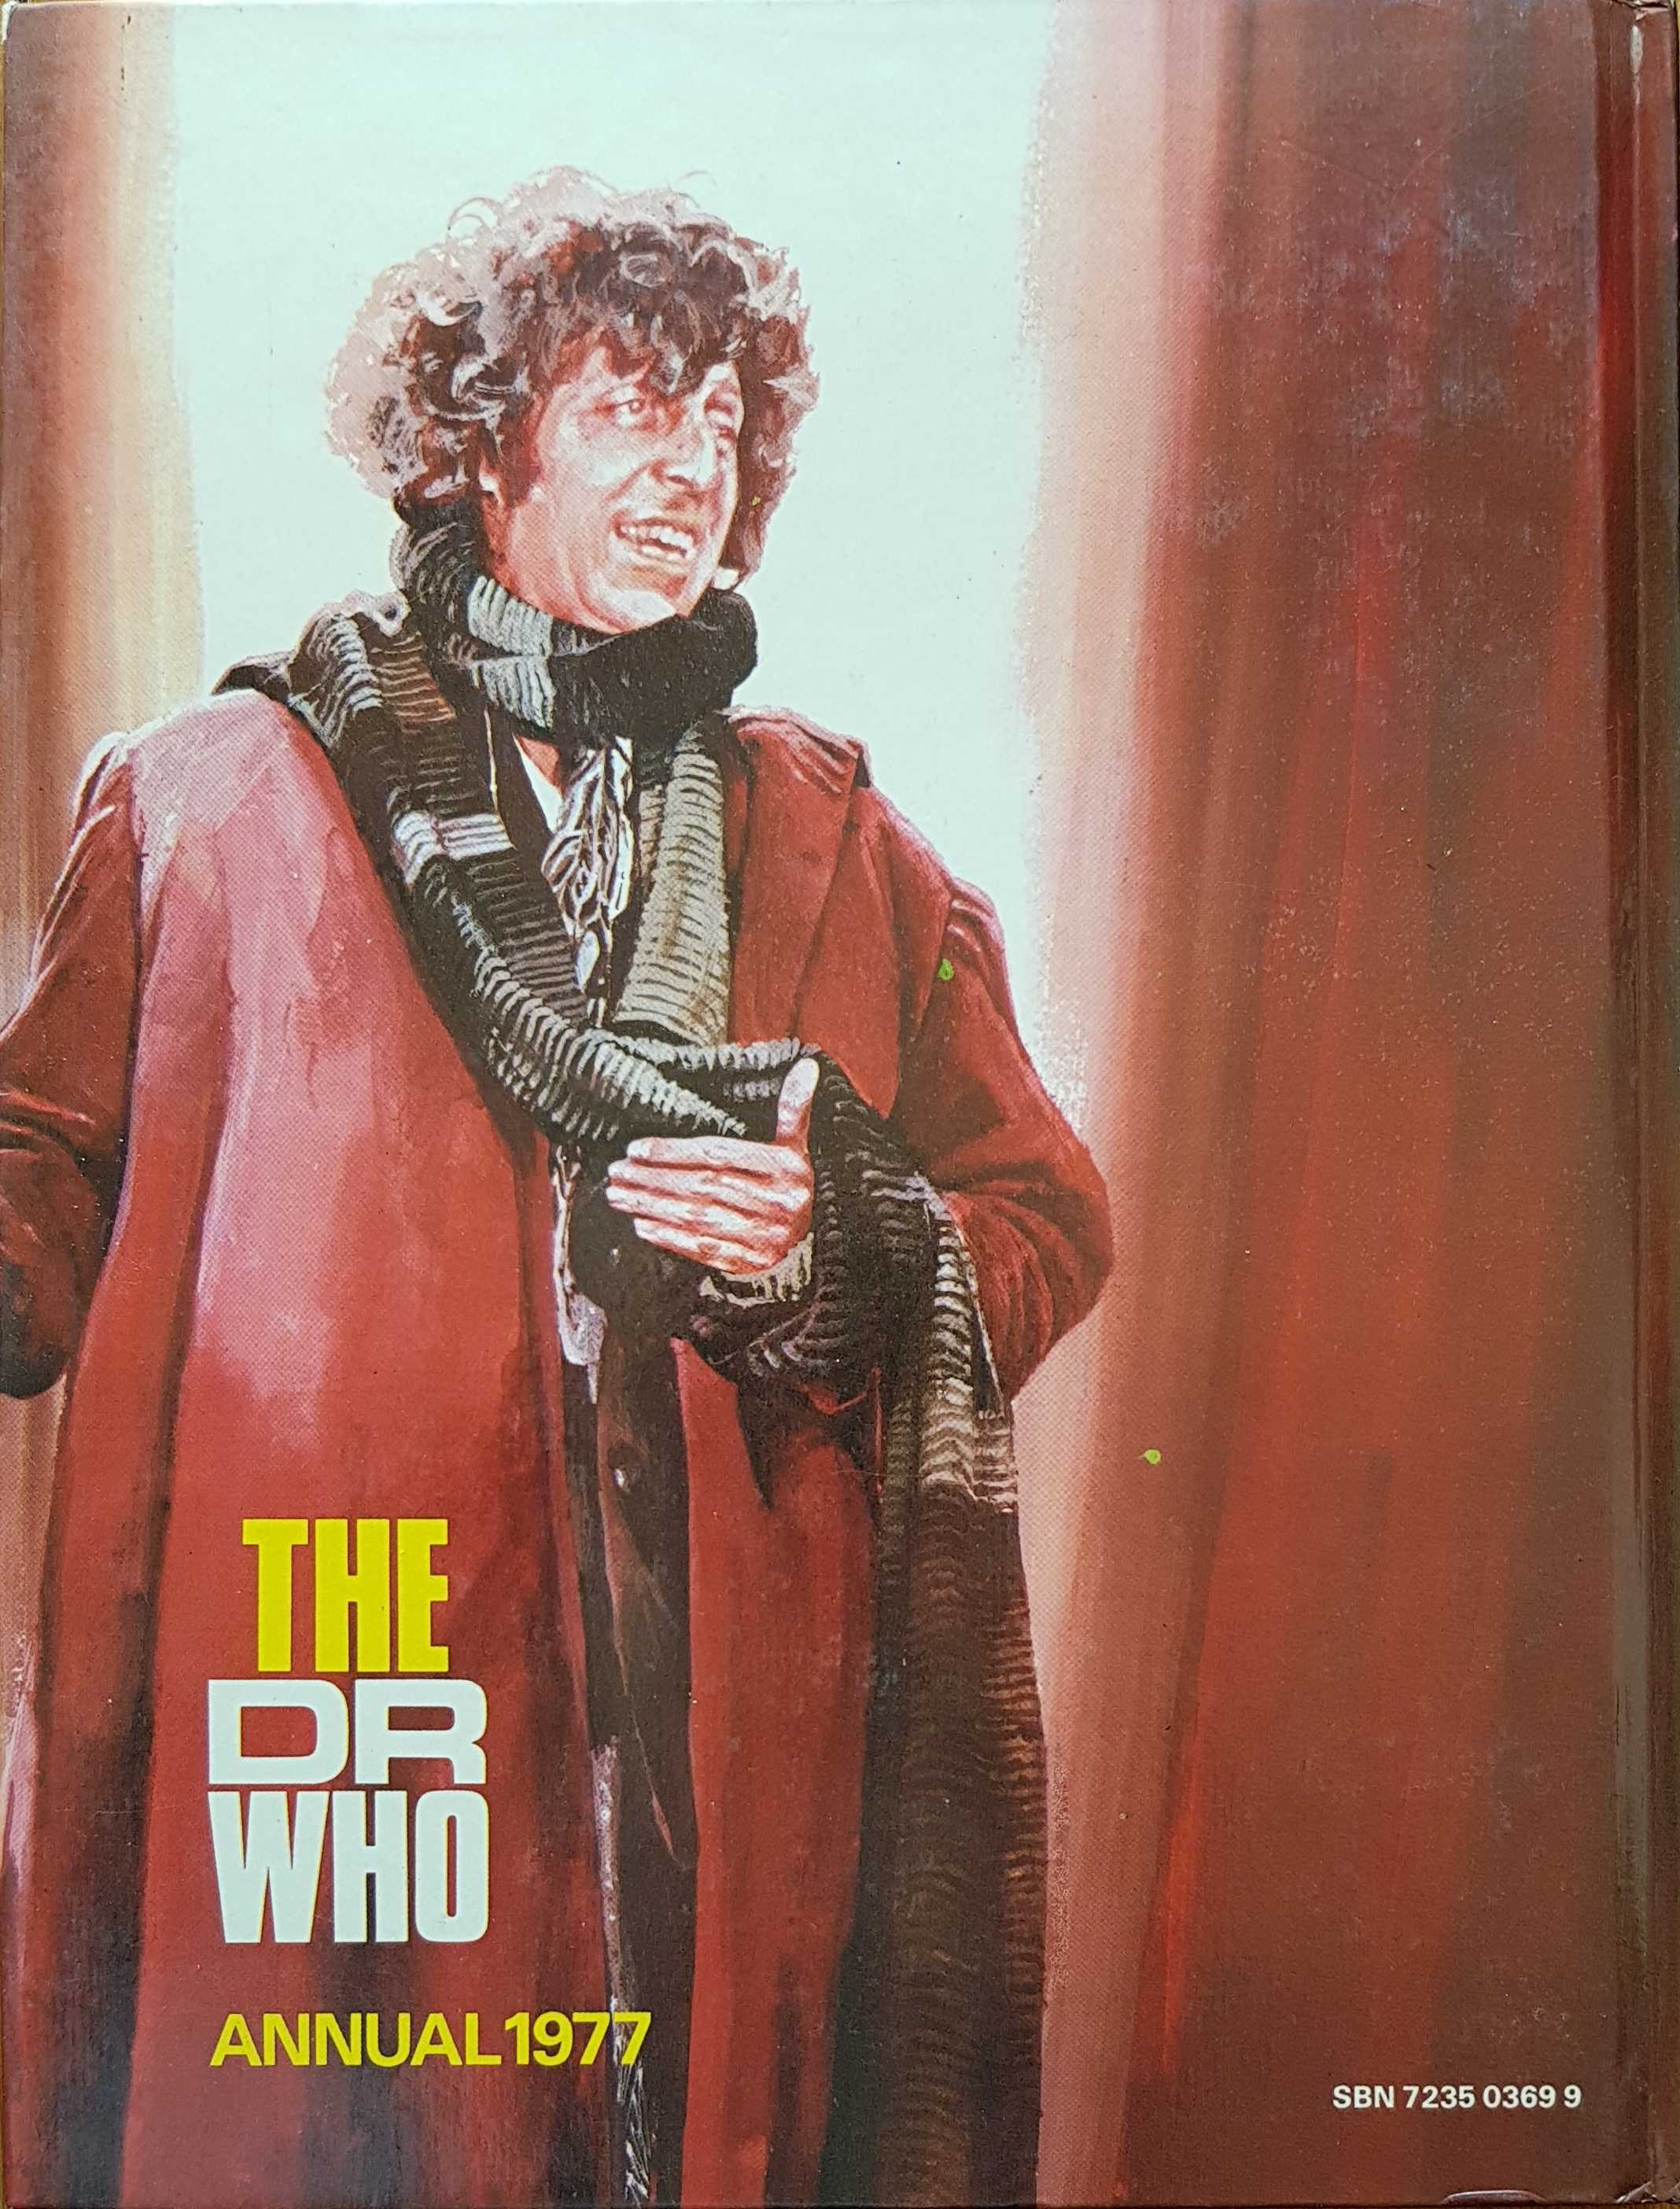 Picture of 7235 0369 9 The Dr Who annual 1977 by artist Unknown from the BBC records and Tapes library